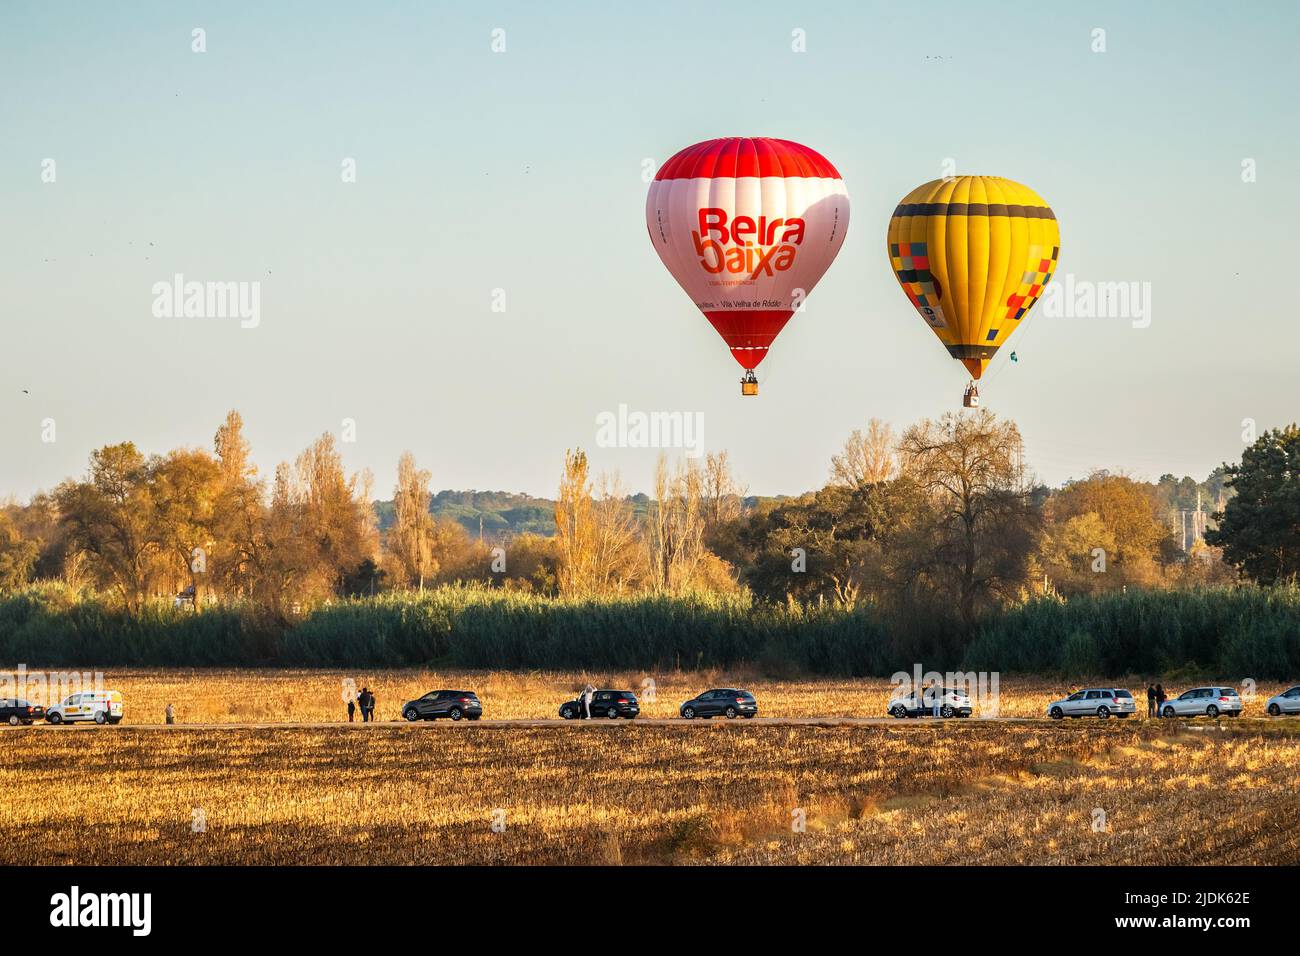 Coruche, Portugal - November 13, 2021: Two hot air balloons flying over trees and farmland in Coruche, Portugal, with cars parked and people watching Stock Photo